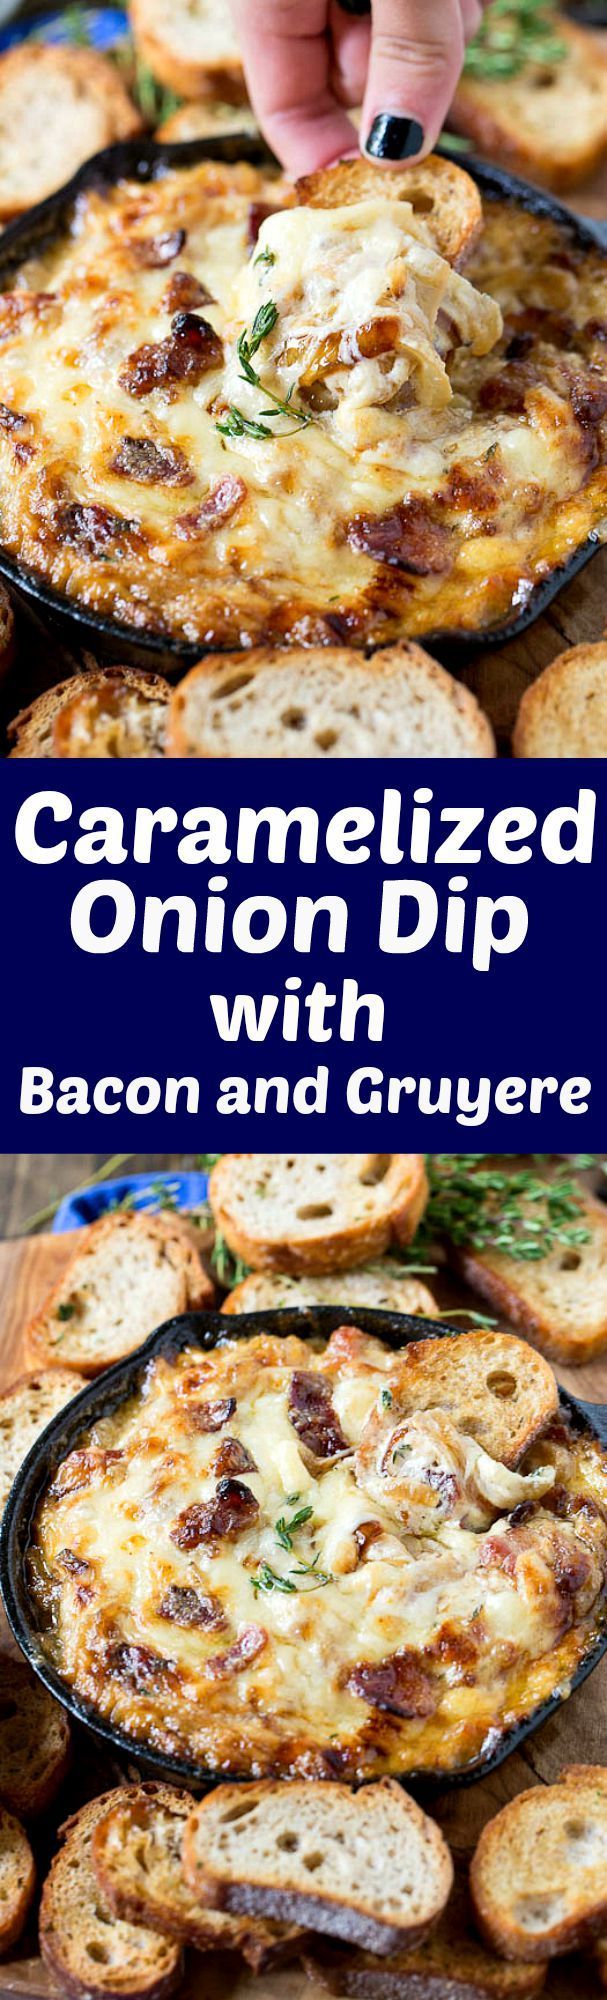 Hot caramelized onion dip with bacon and gruyere. How can you go wrong with bacon, onion & cheese!